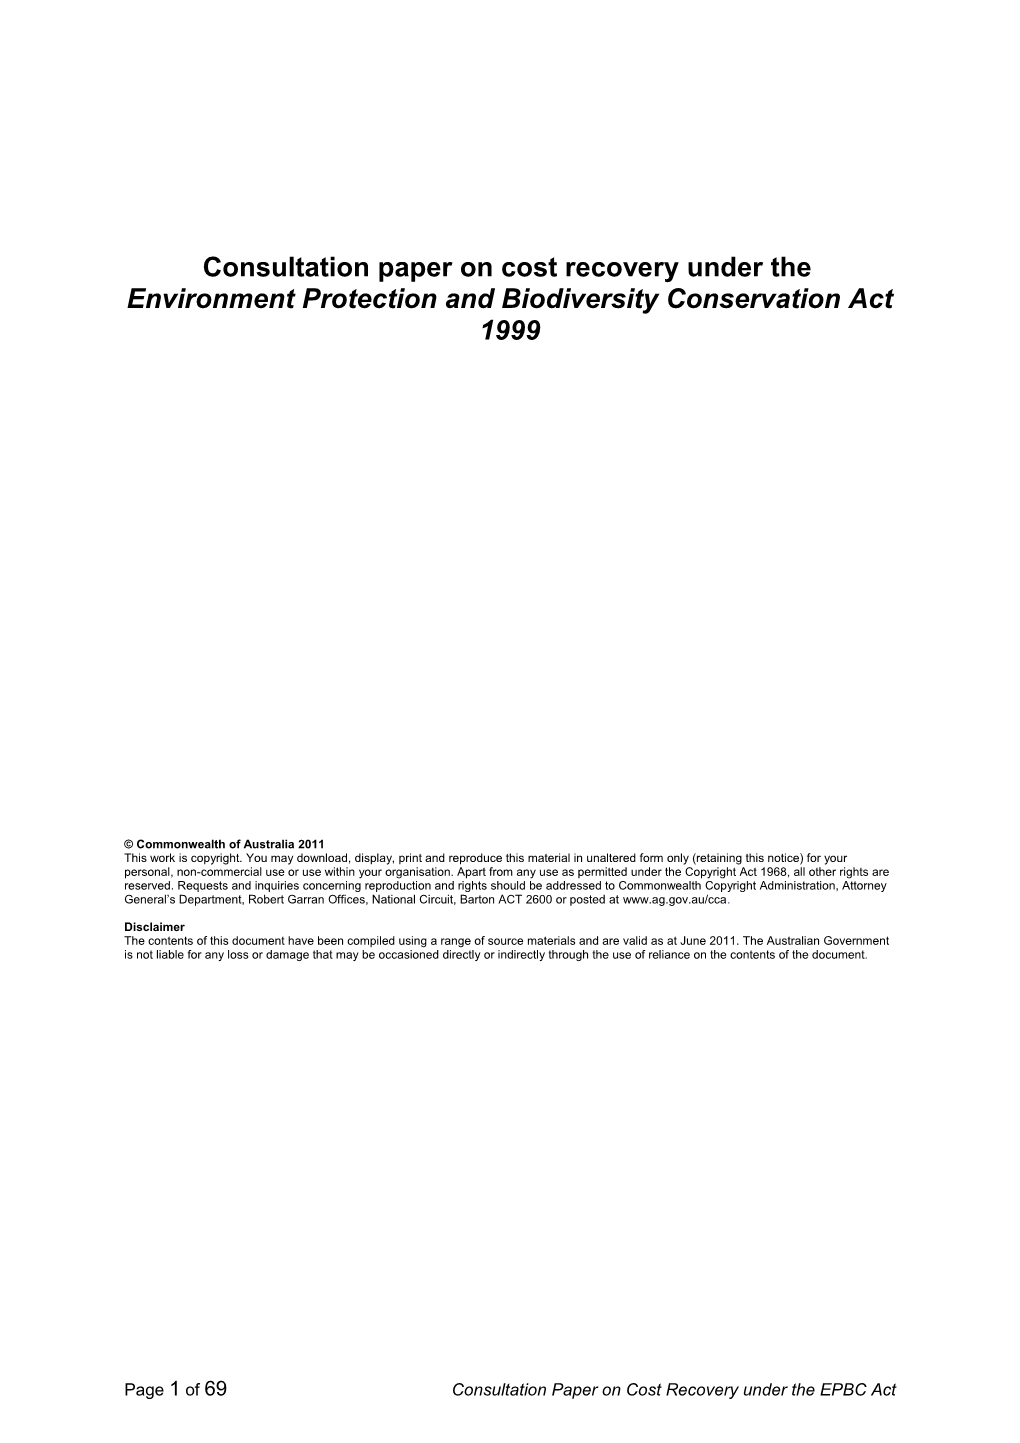 Consultation Paper on Cost Recovery Under the Environment Protection and Biodiversity